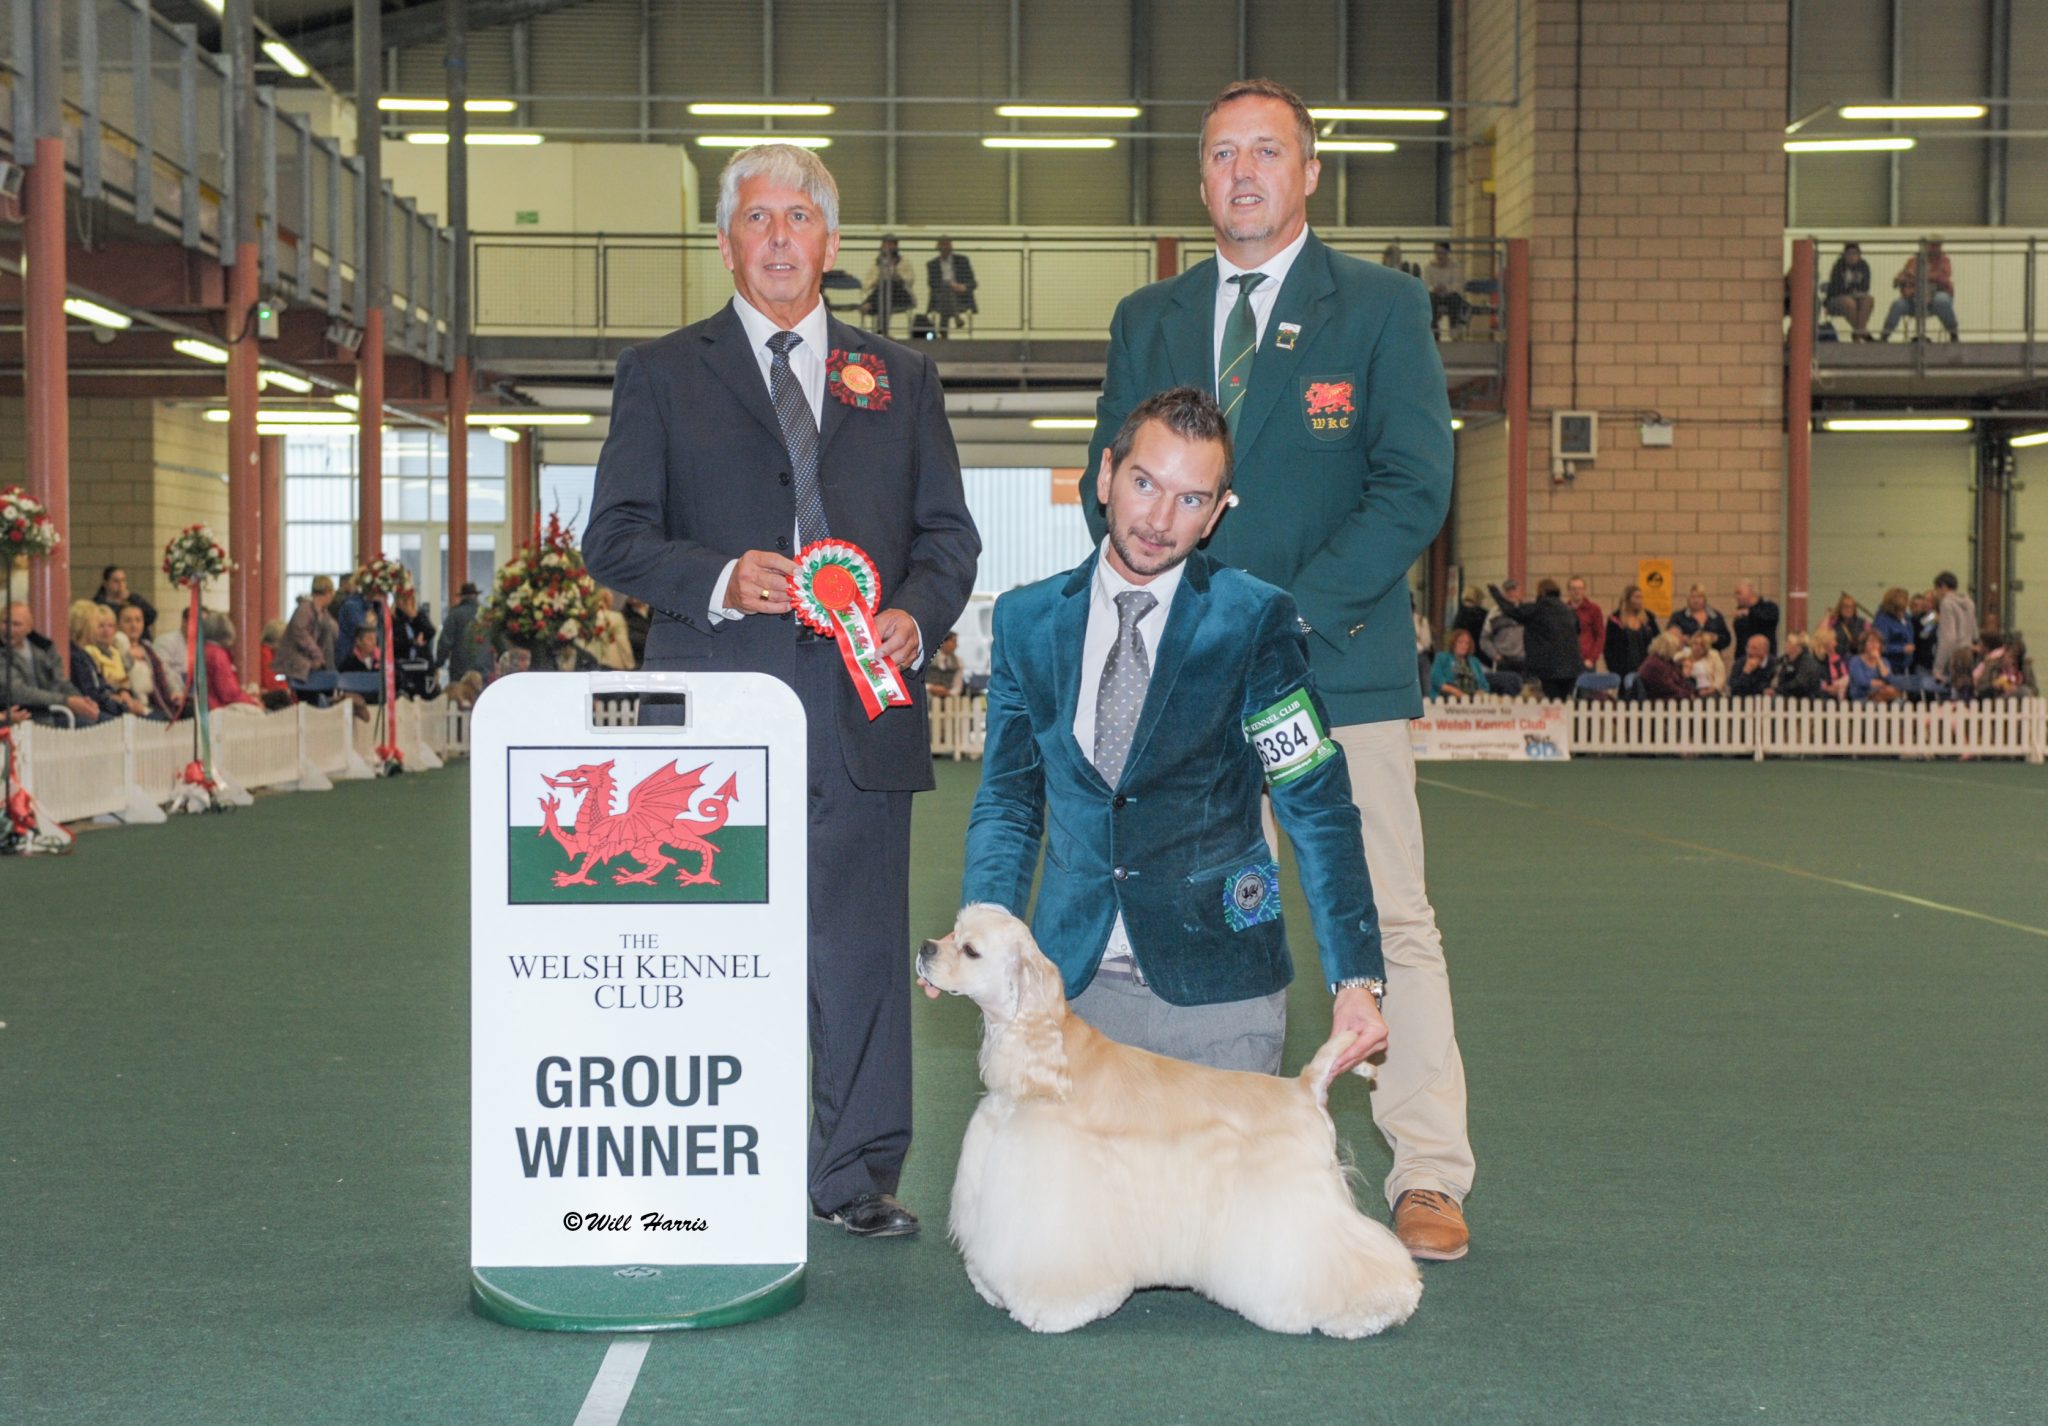 The Welsh Kennel Club